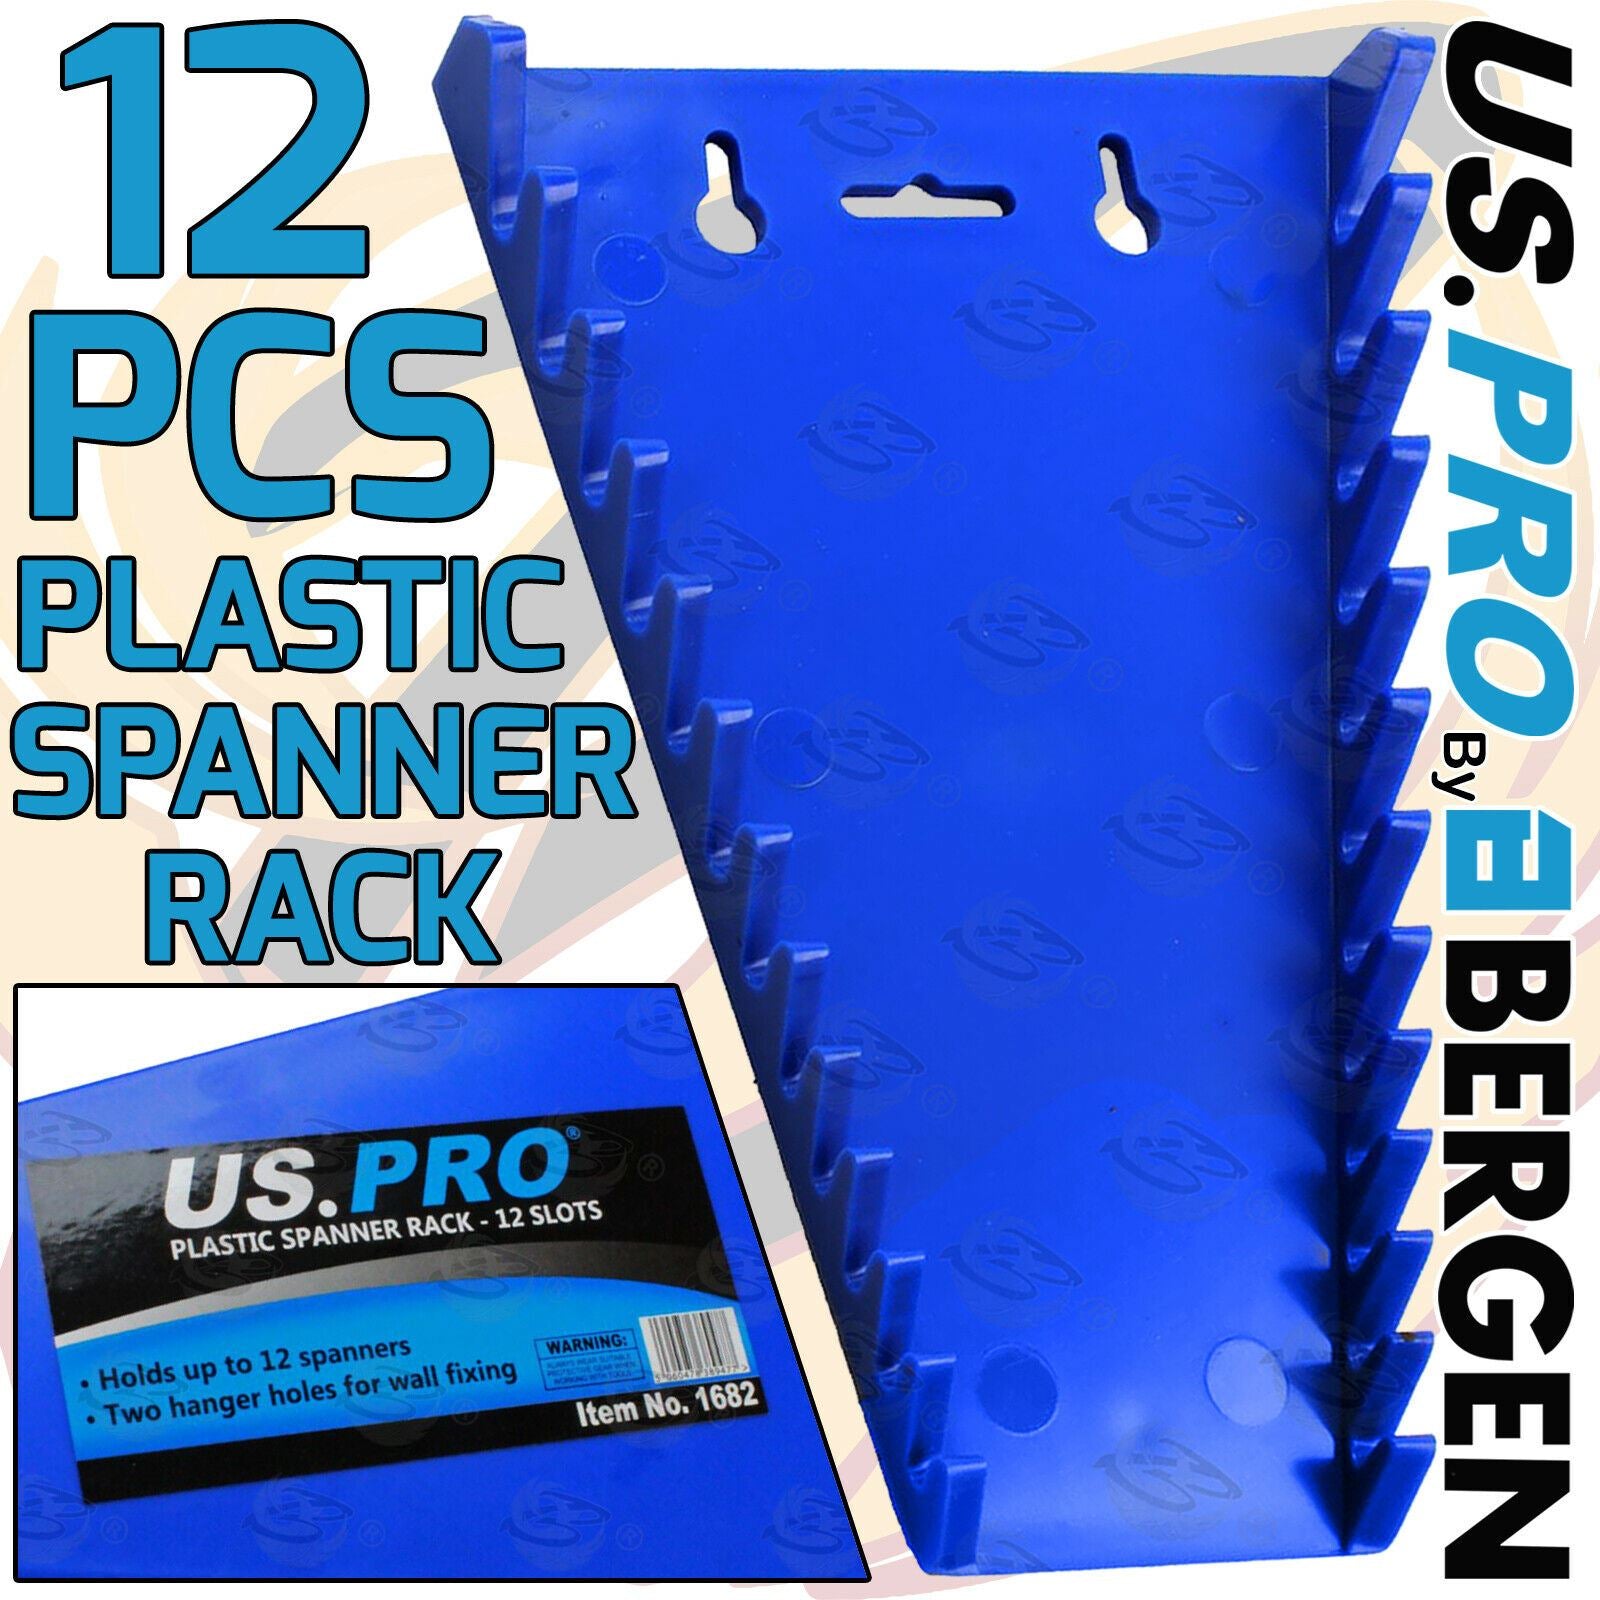 US PRO PLASTIC SPANNER RACK ( HOLDS 12 SPANNERS )